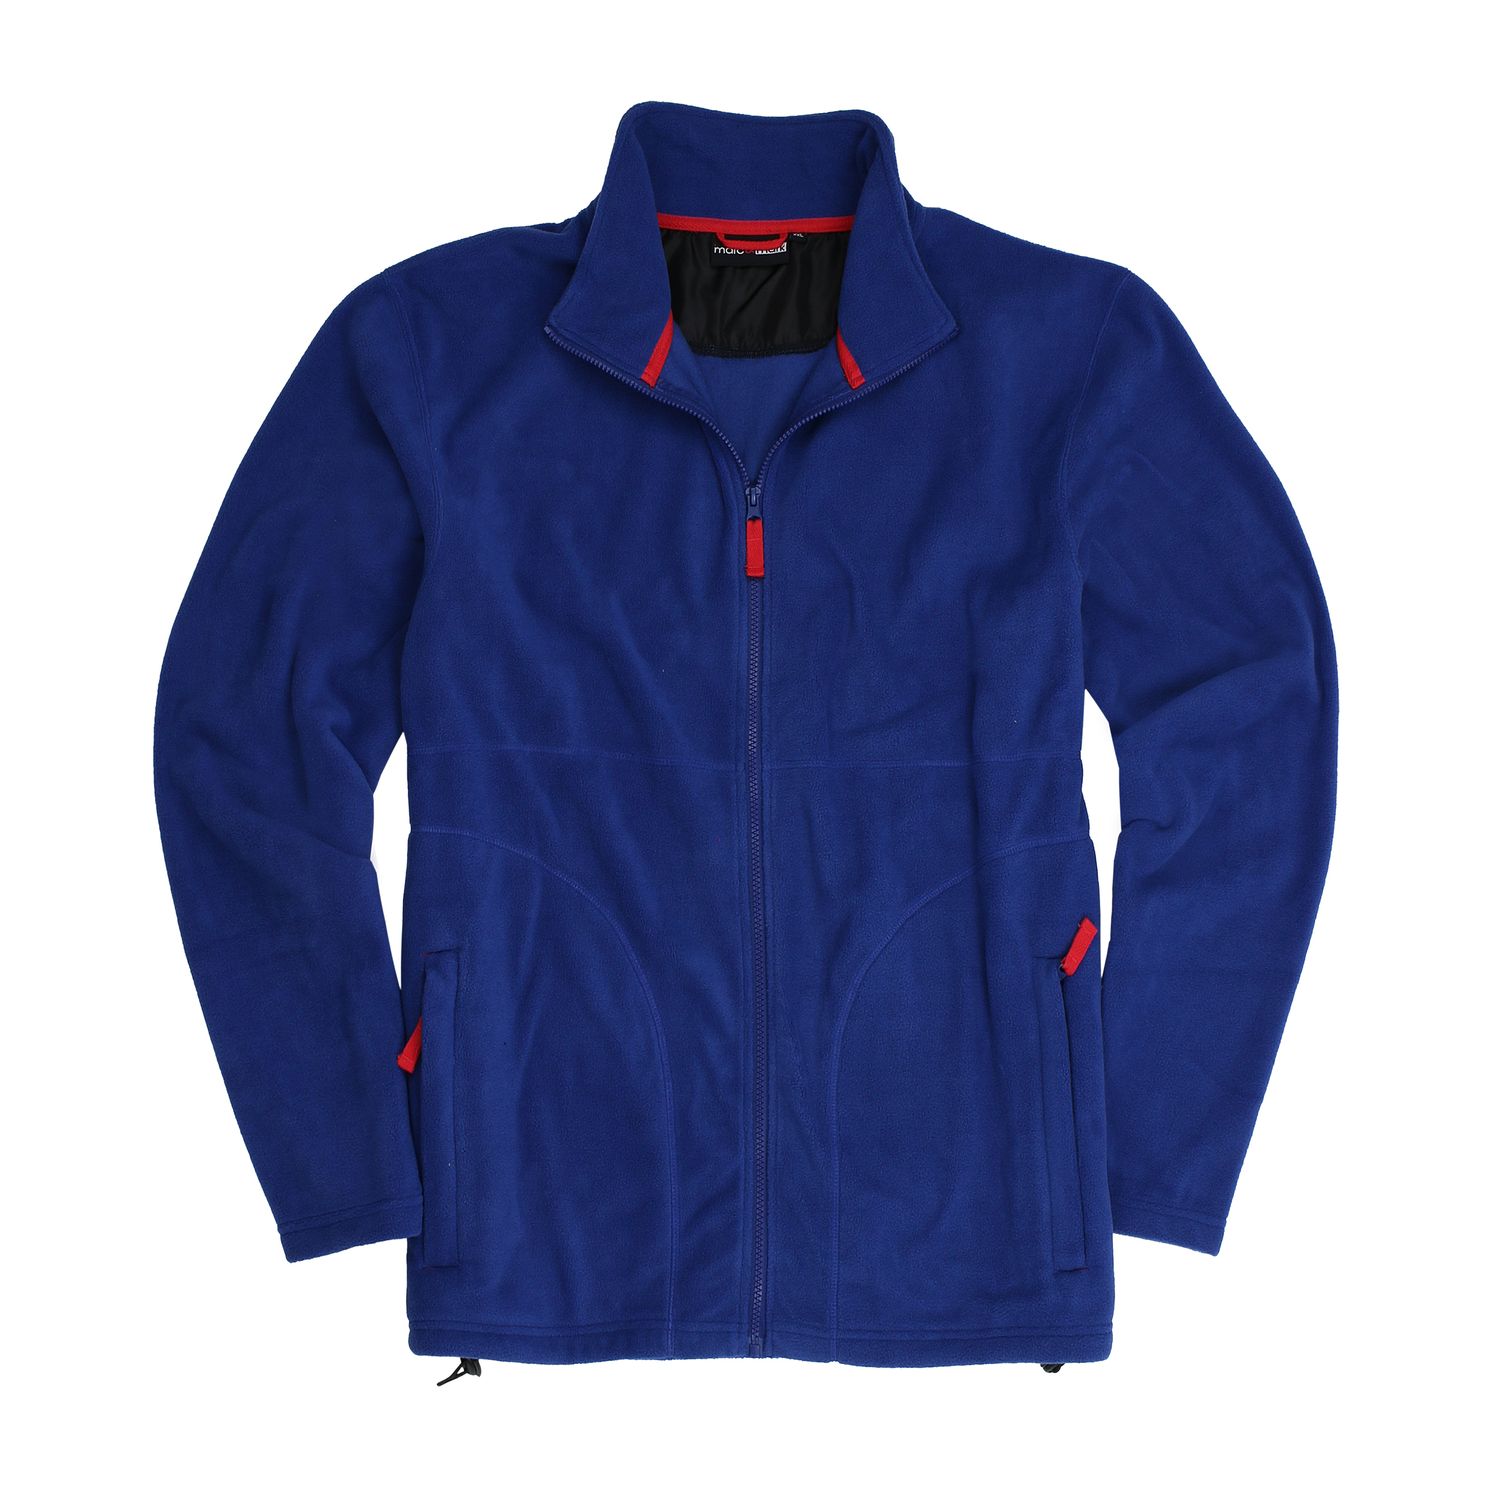 Fleece jacket for men in blue by Marc&Mark in oversizes up to 12XL